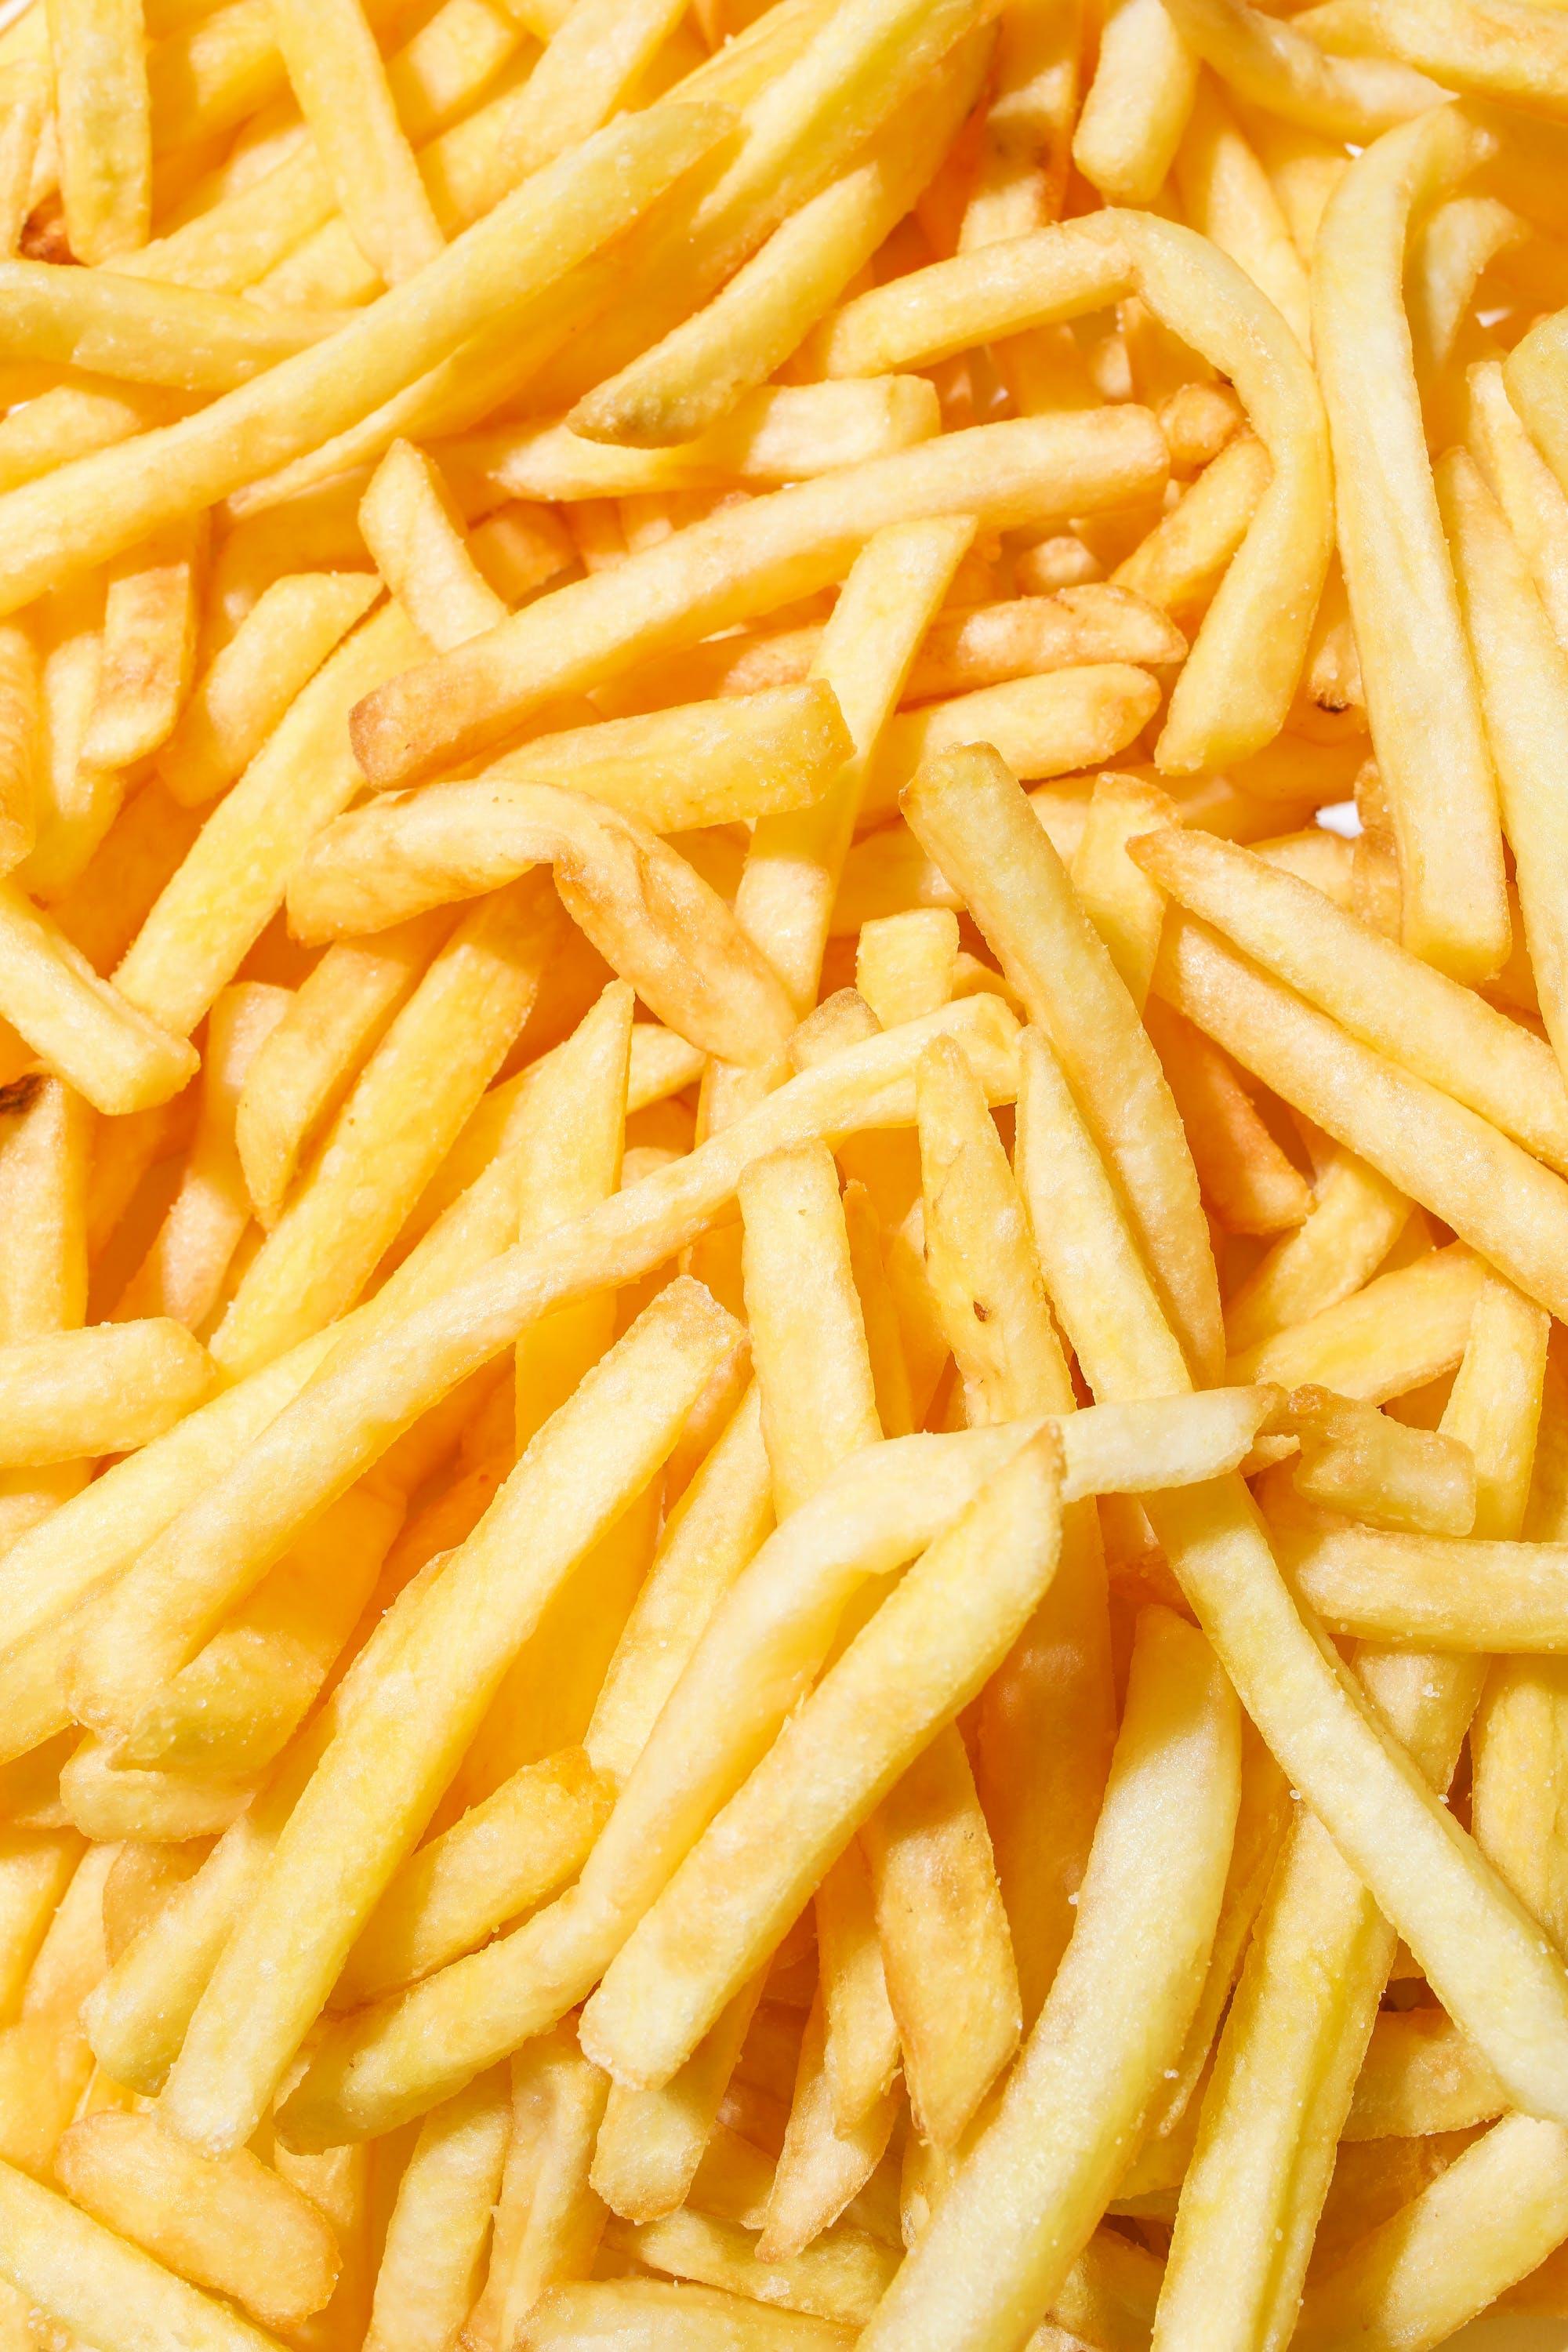 How much profit does french fries make? 